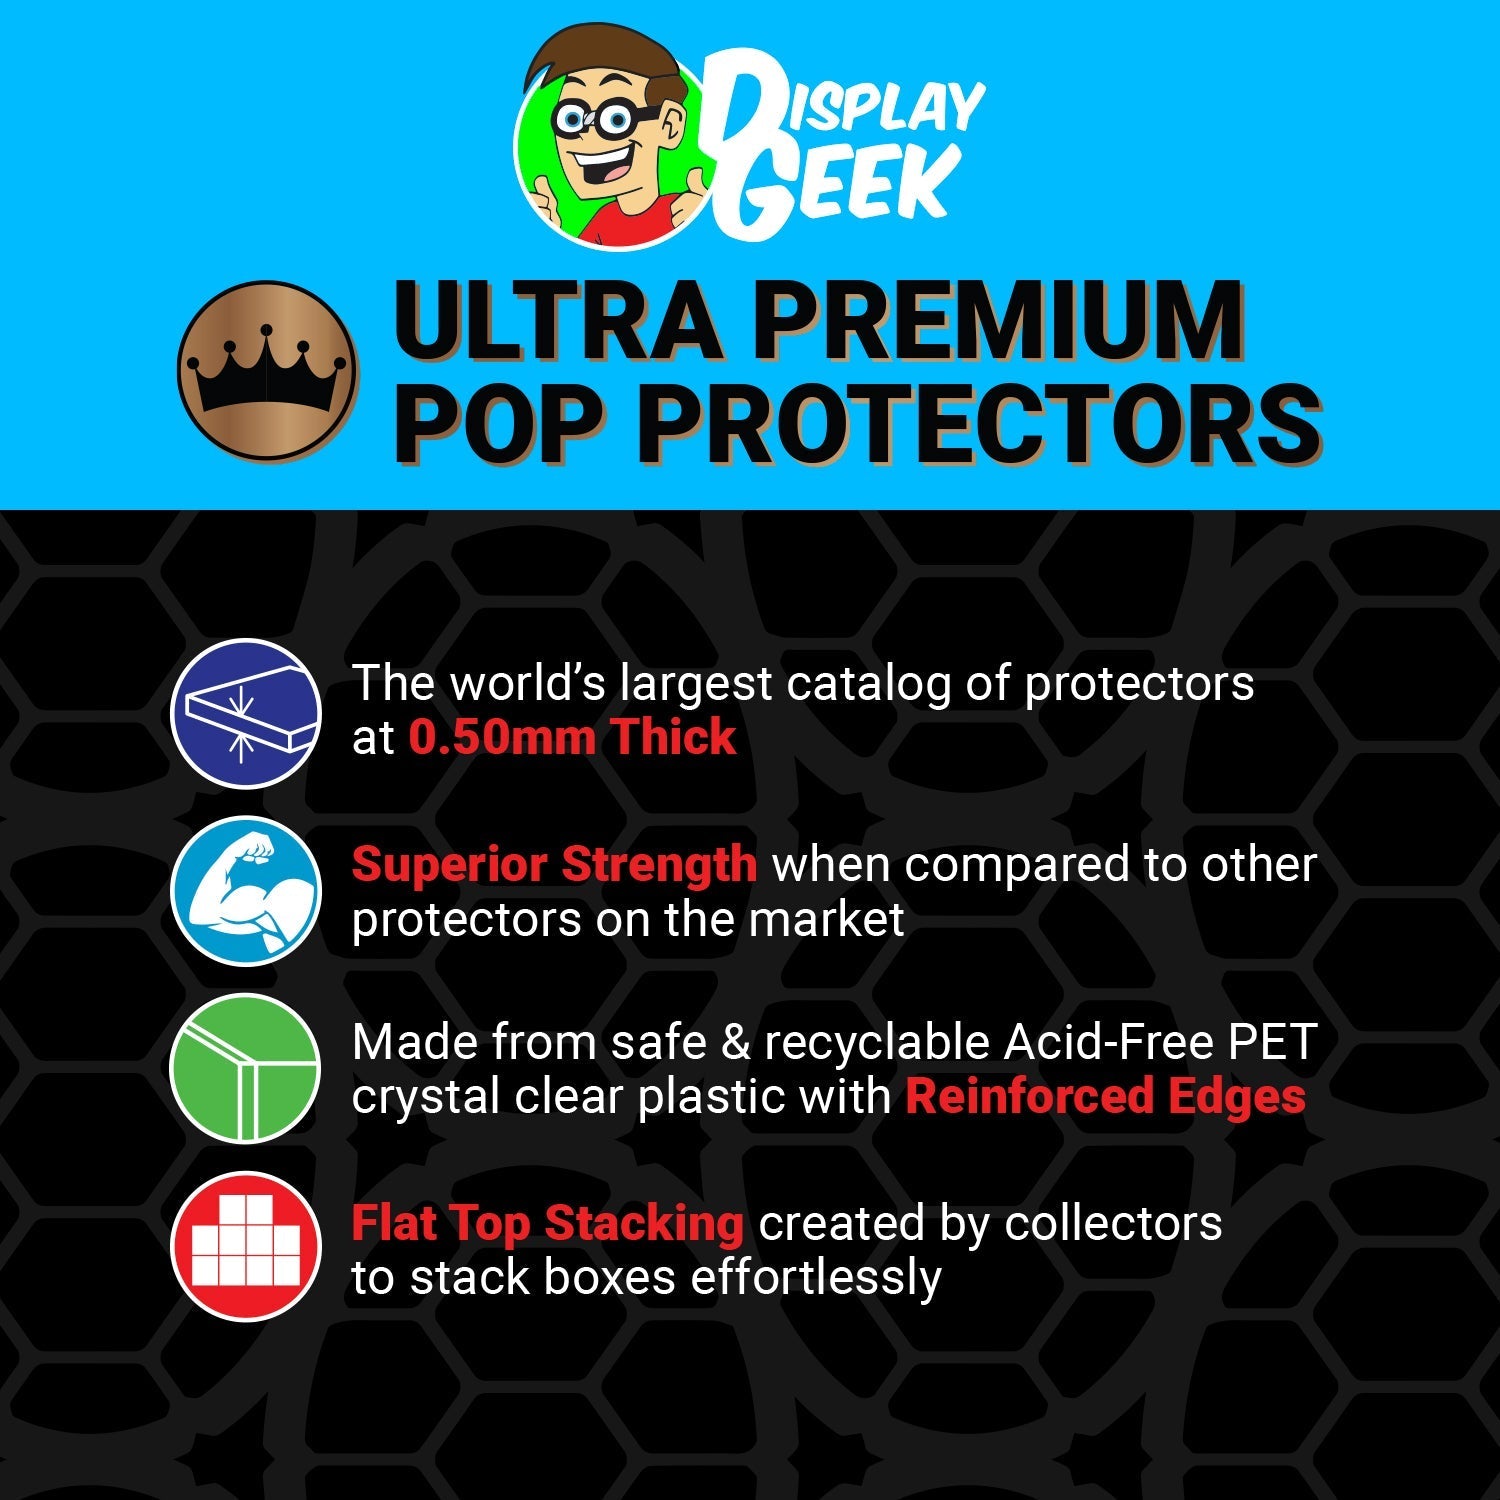 Pop Protector for Freddy Funko as Skeletor SDCC LE 100 - PPG Pop Protector Guide Search Created by Display Geek